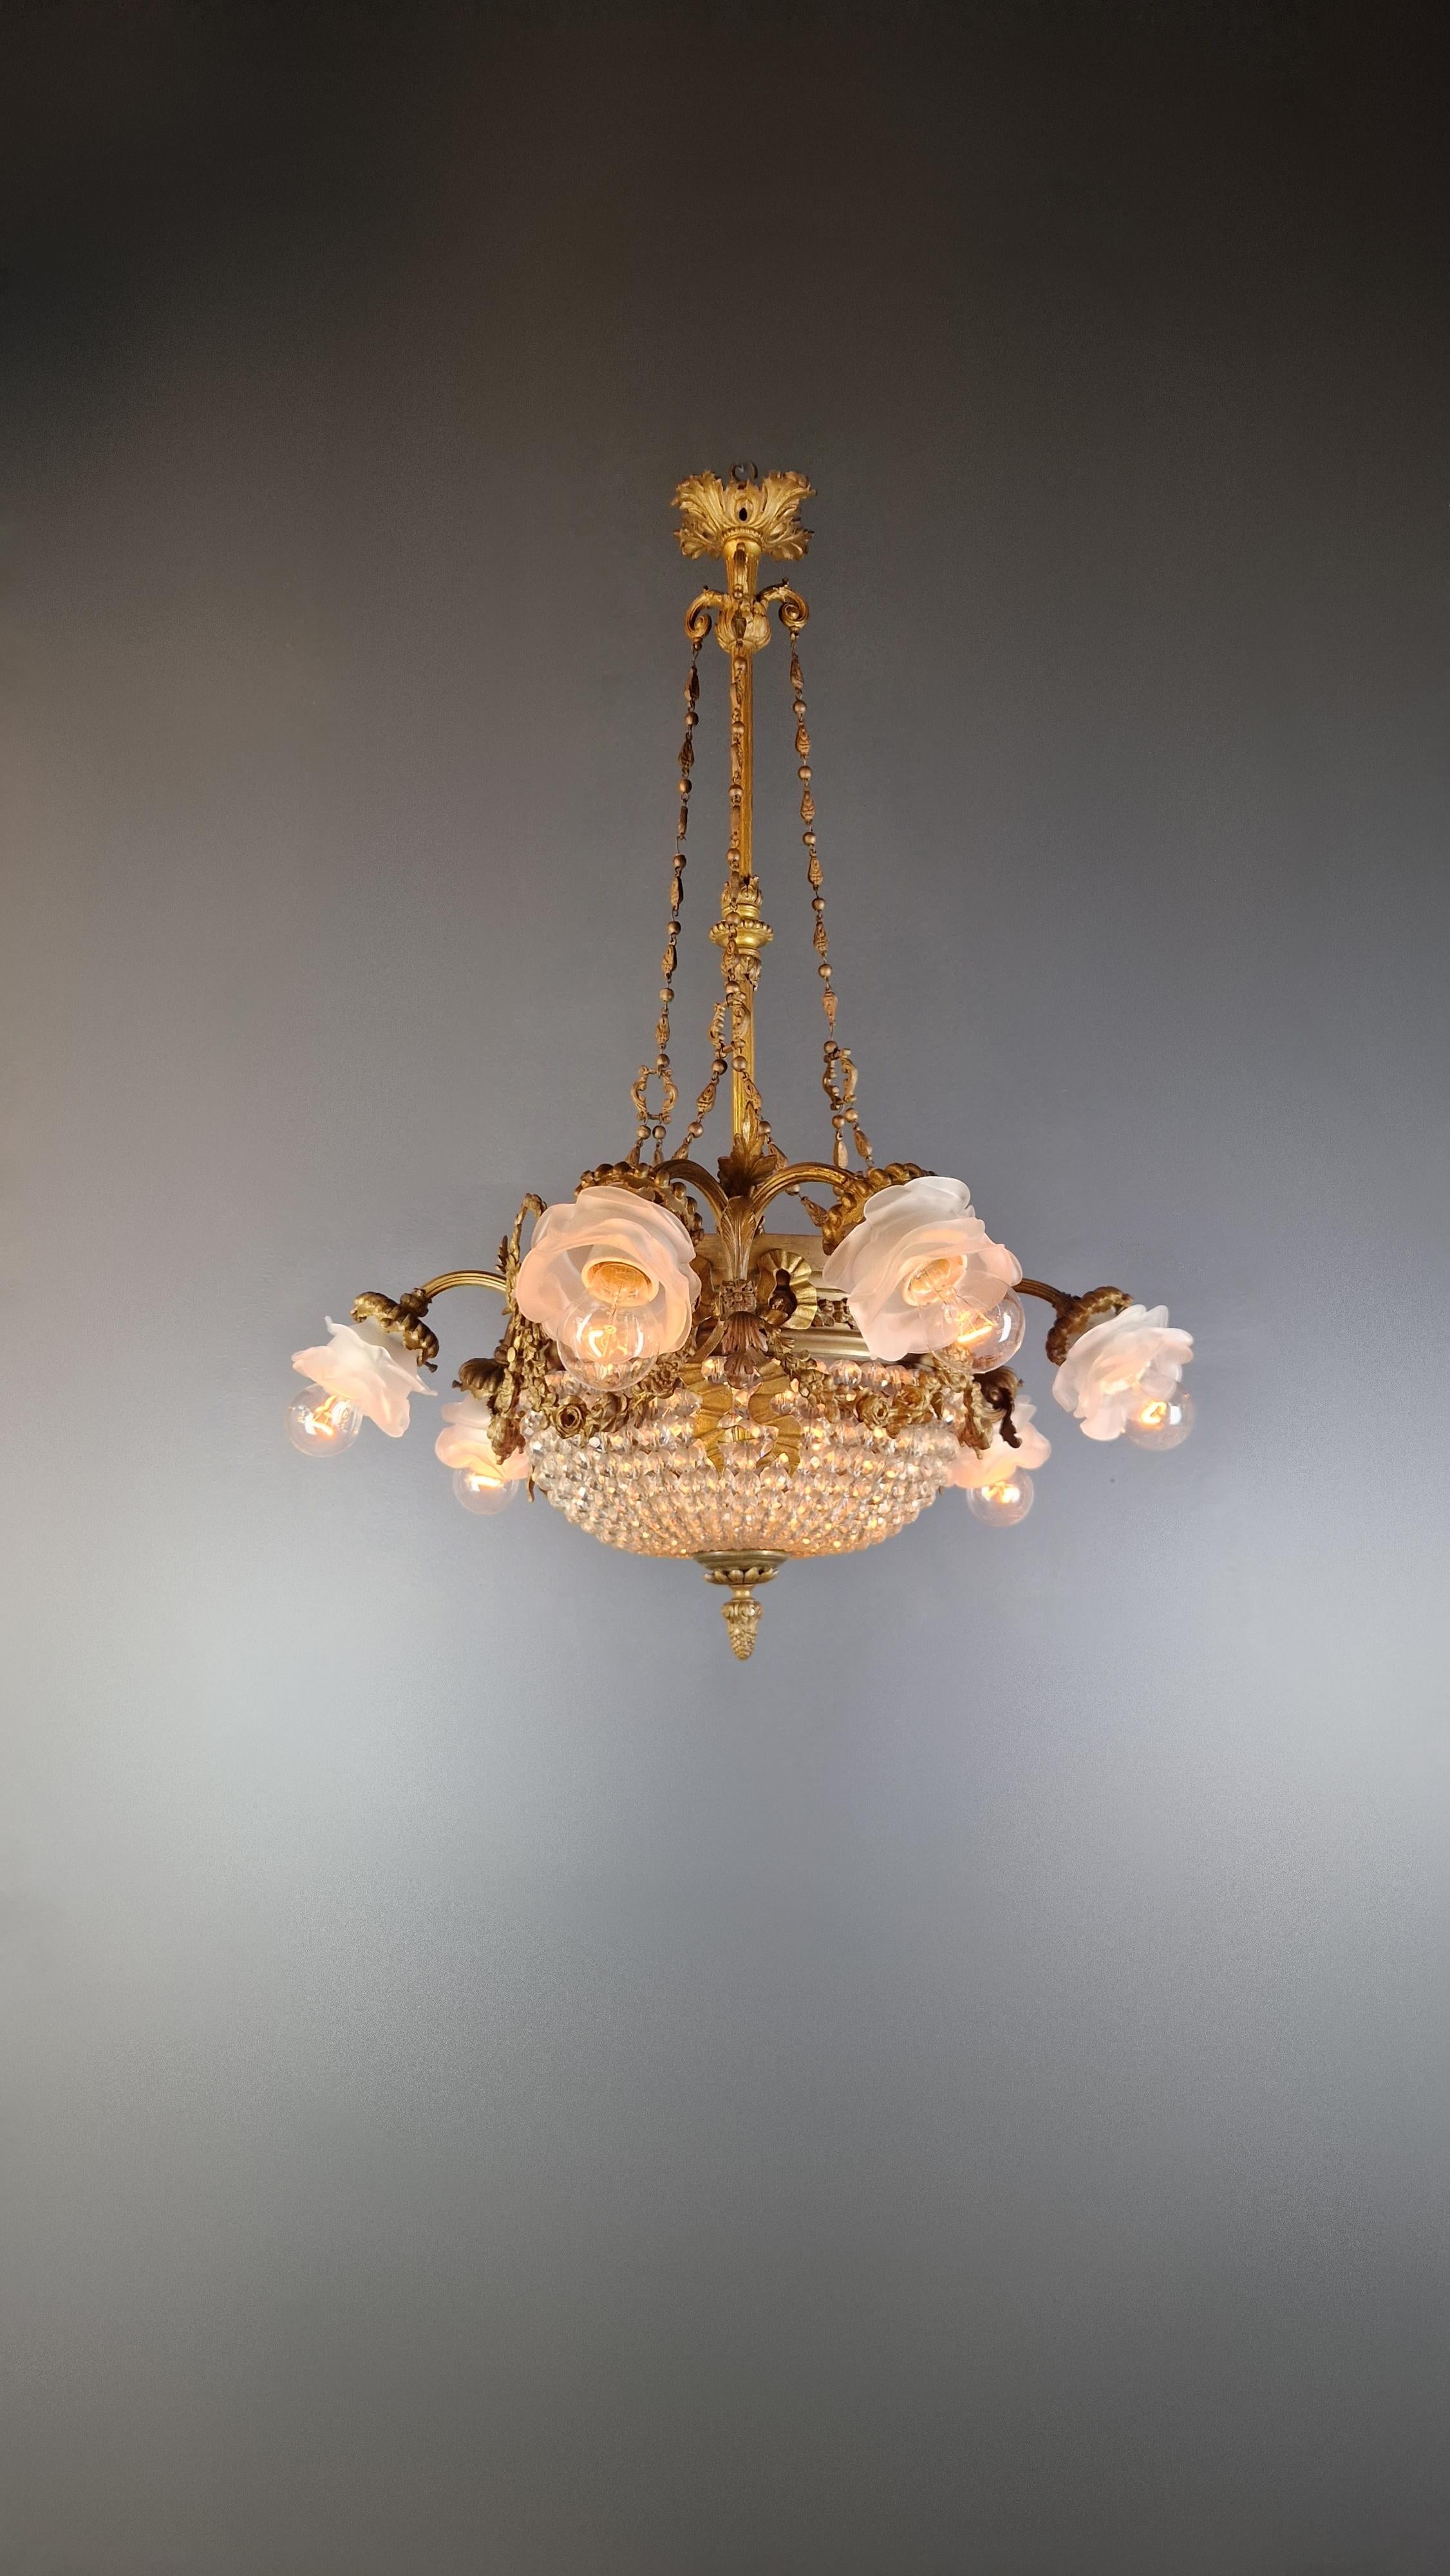 Elegant antique chandelier: a testament to craftsmanship and grace

Experience the revived splendor of the past in our meticulously restored vintage chandelier, a true masterpiece that embodies the pinnacle of Art Nouveau design. With the greatest